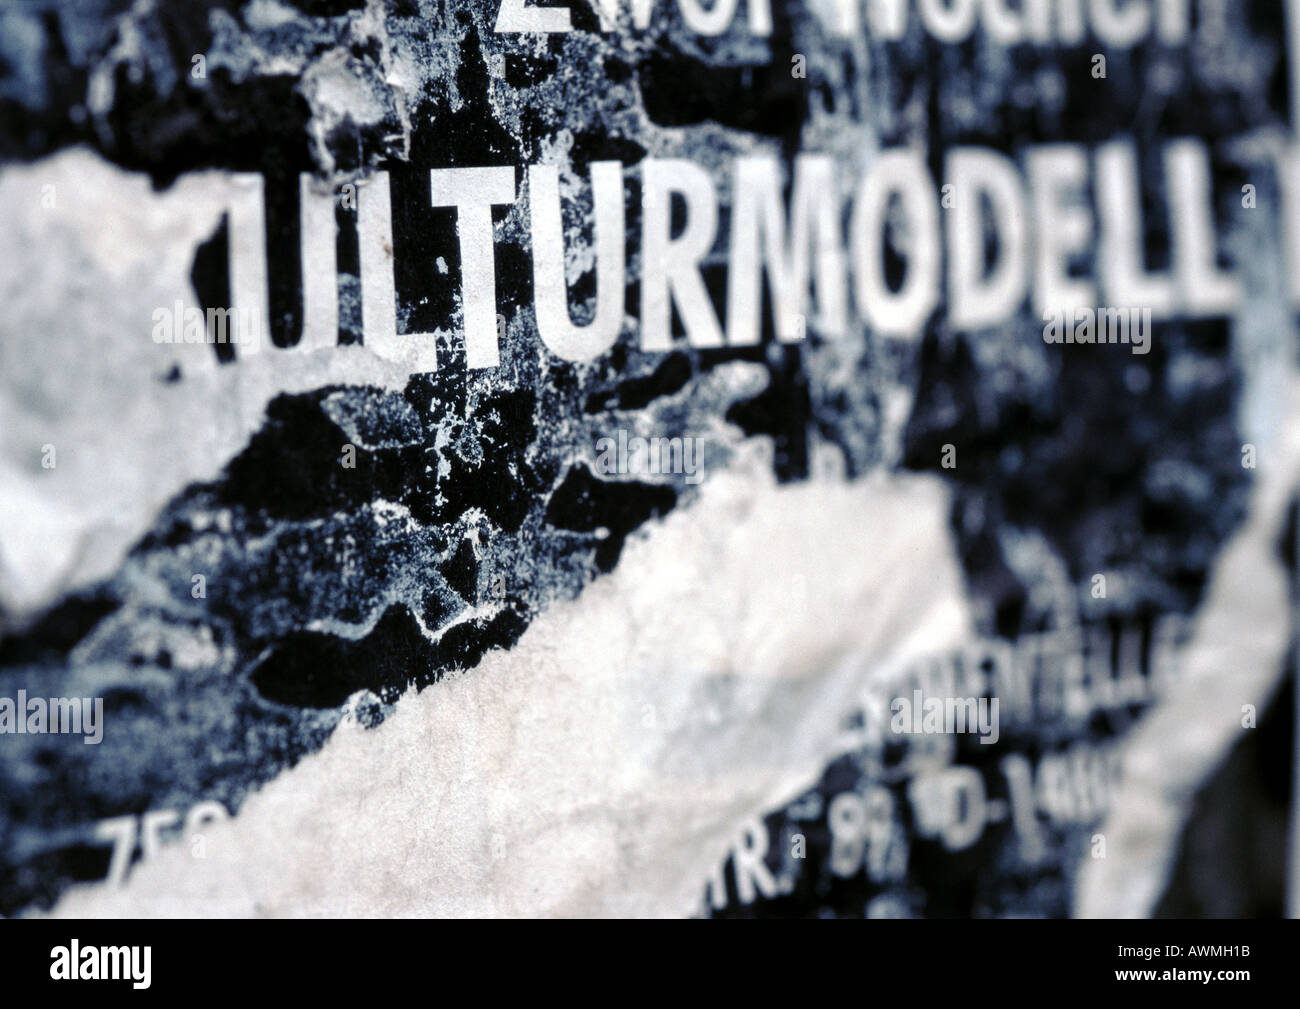 Cultural model text in German printed on torn poster, close-up Stock Photo